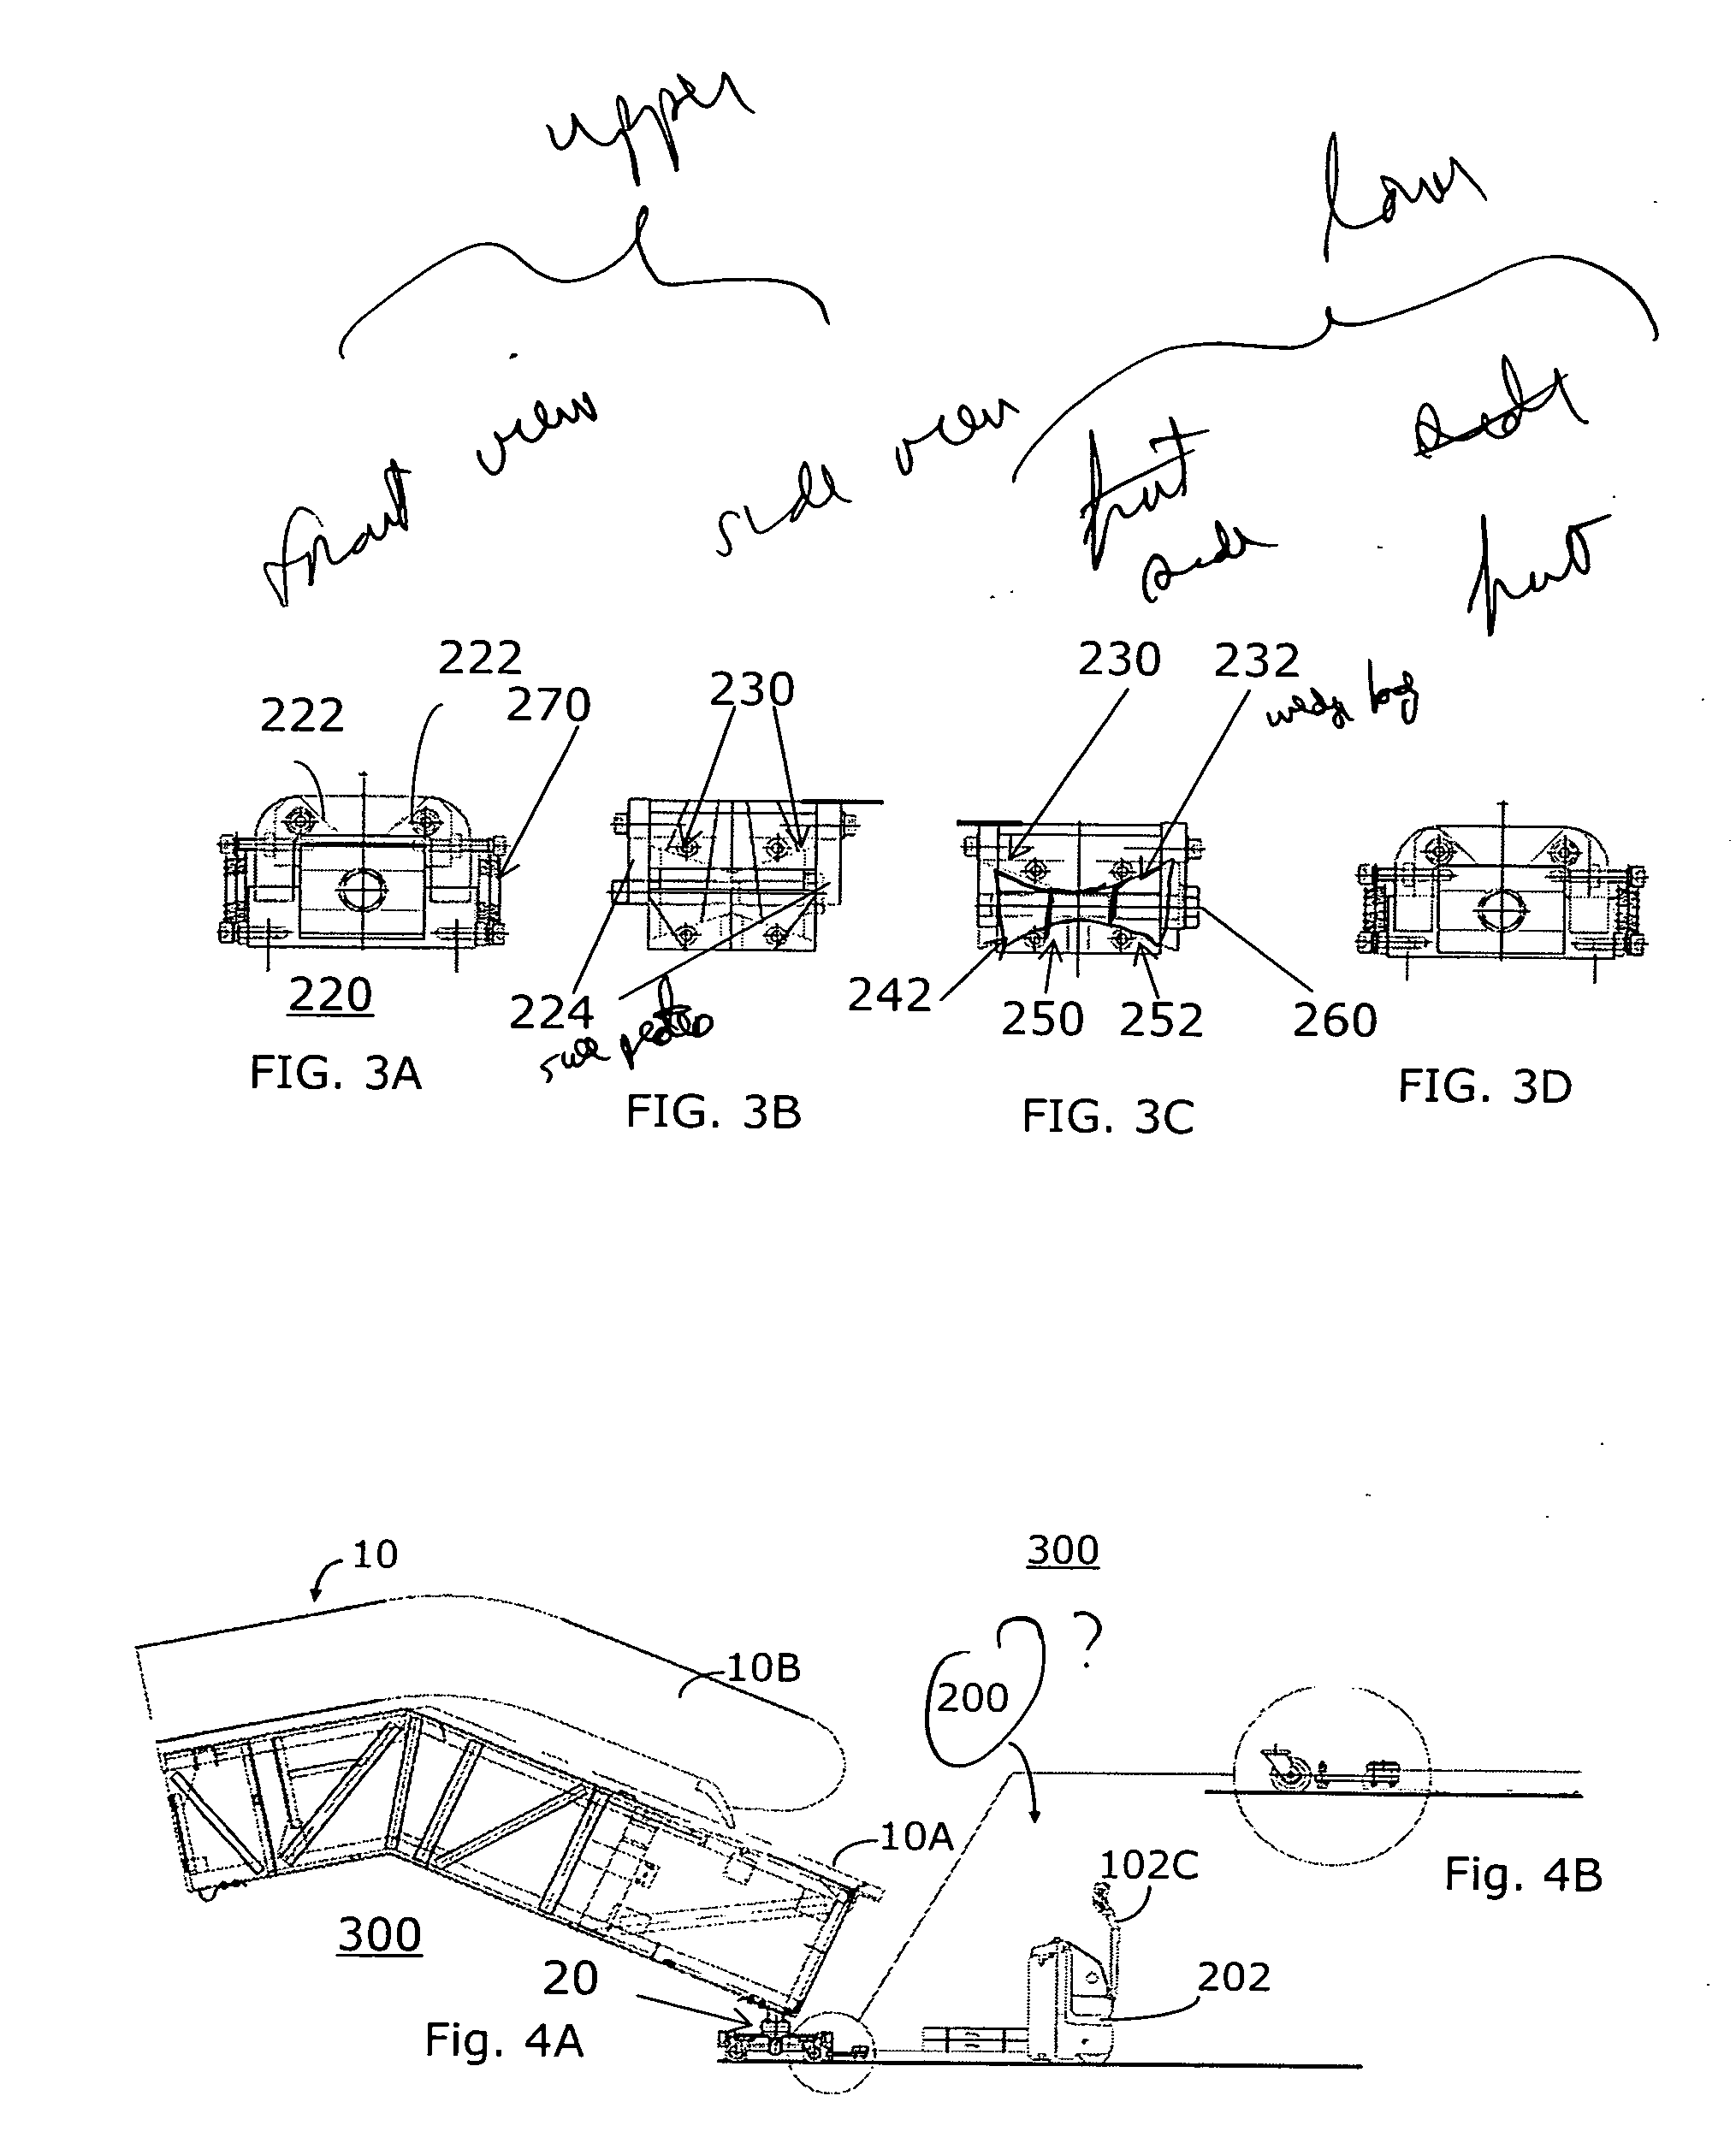 Lifting system, transportation system cradle, intermediate product with transportation system cradle and transportation system structure, assembly plant and assembly method for manufacturing assembly of intermediate products